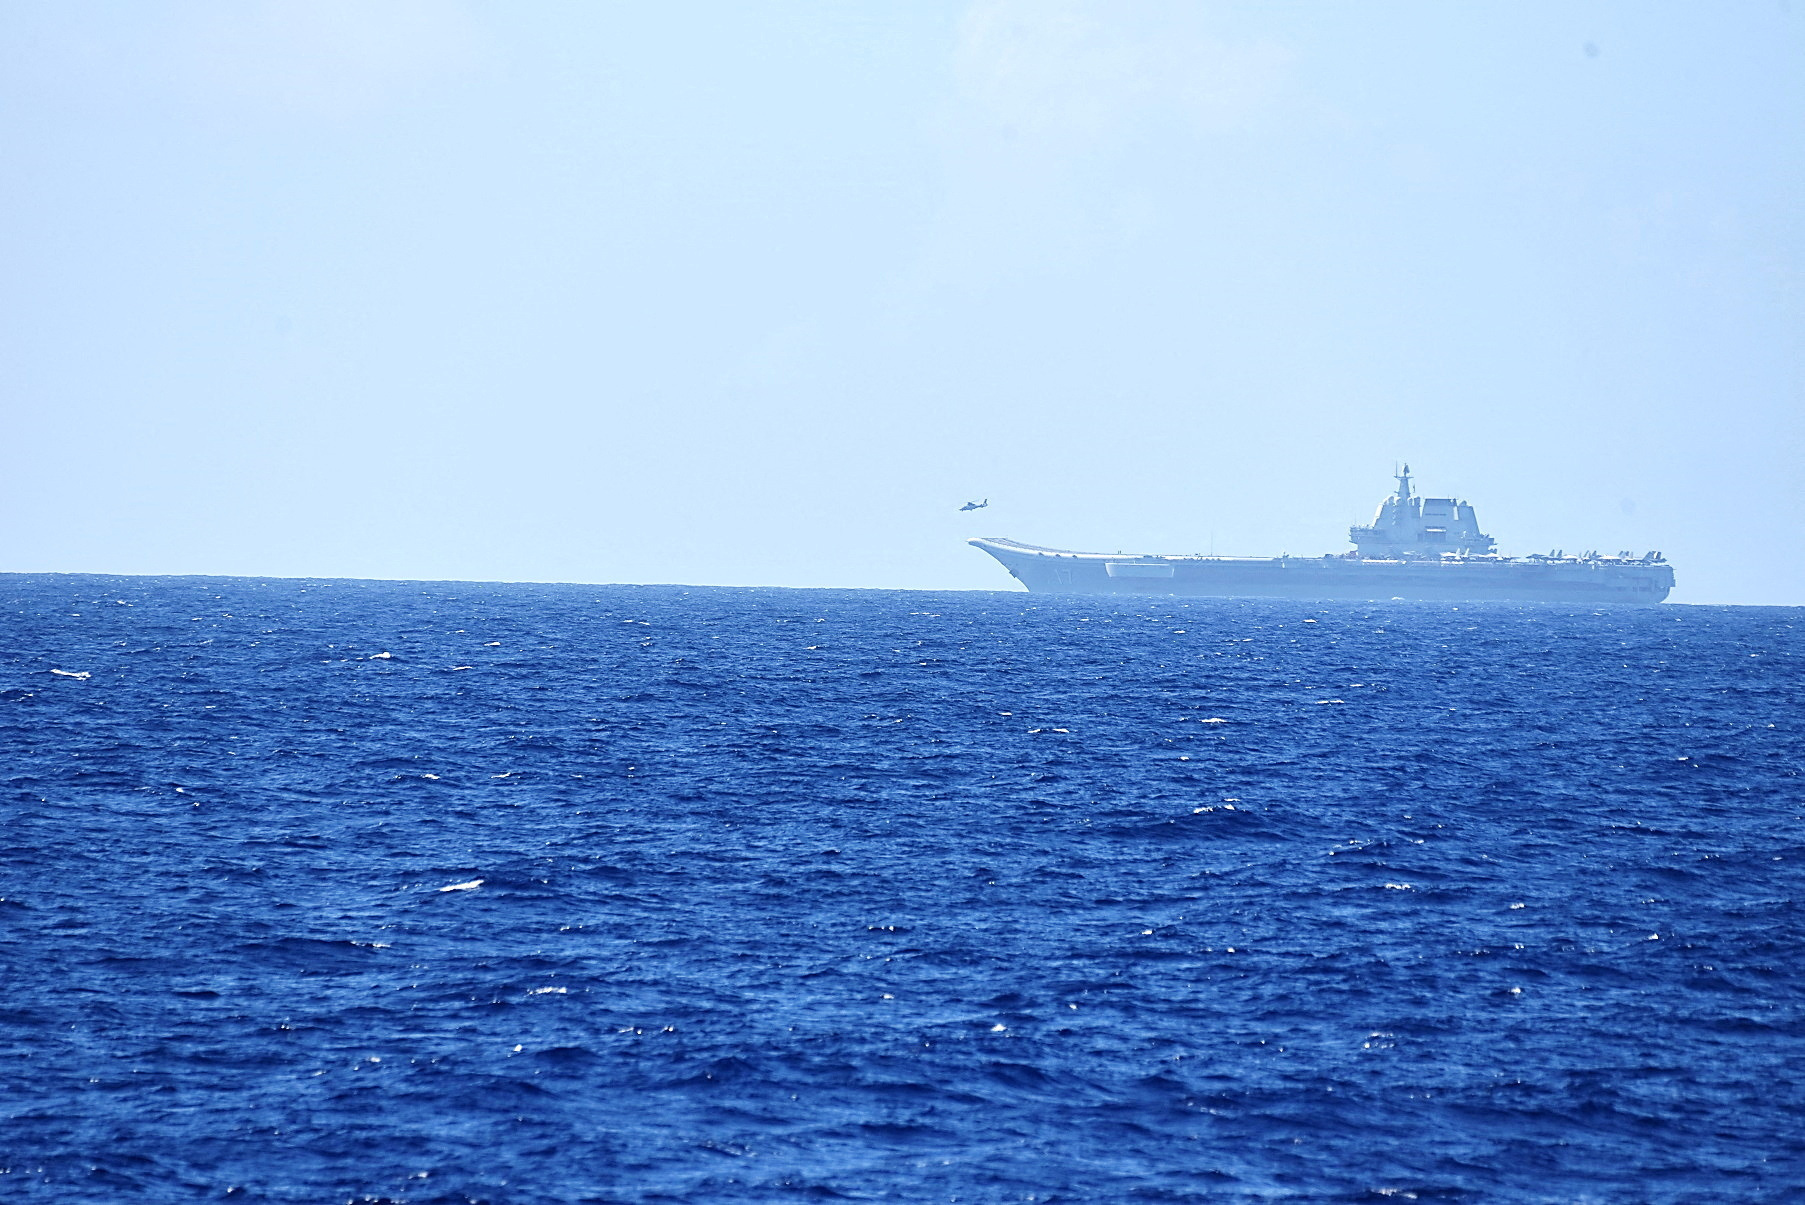 A helicopter takes off from China's Shandong aircraft carrier, over Pacific Ocean waters, south of Okinawa prefecture